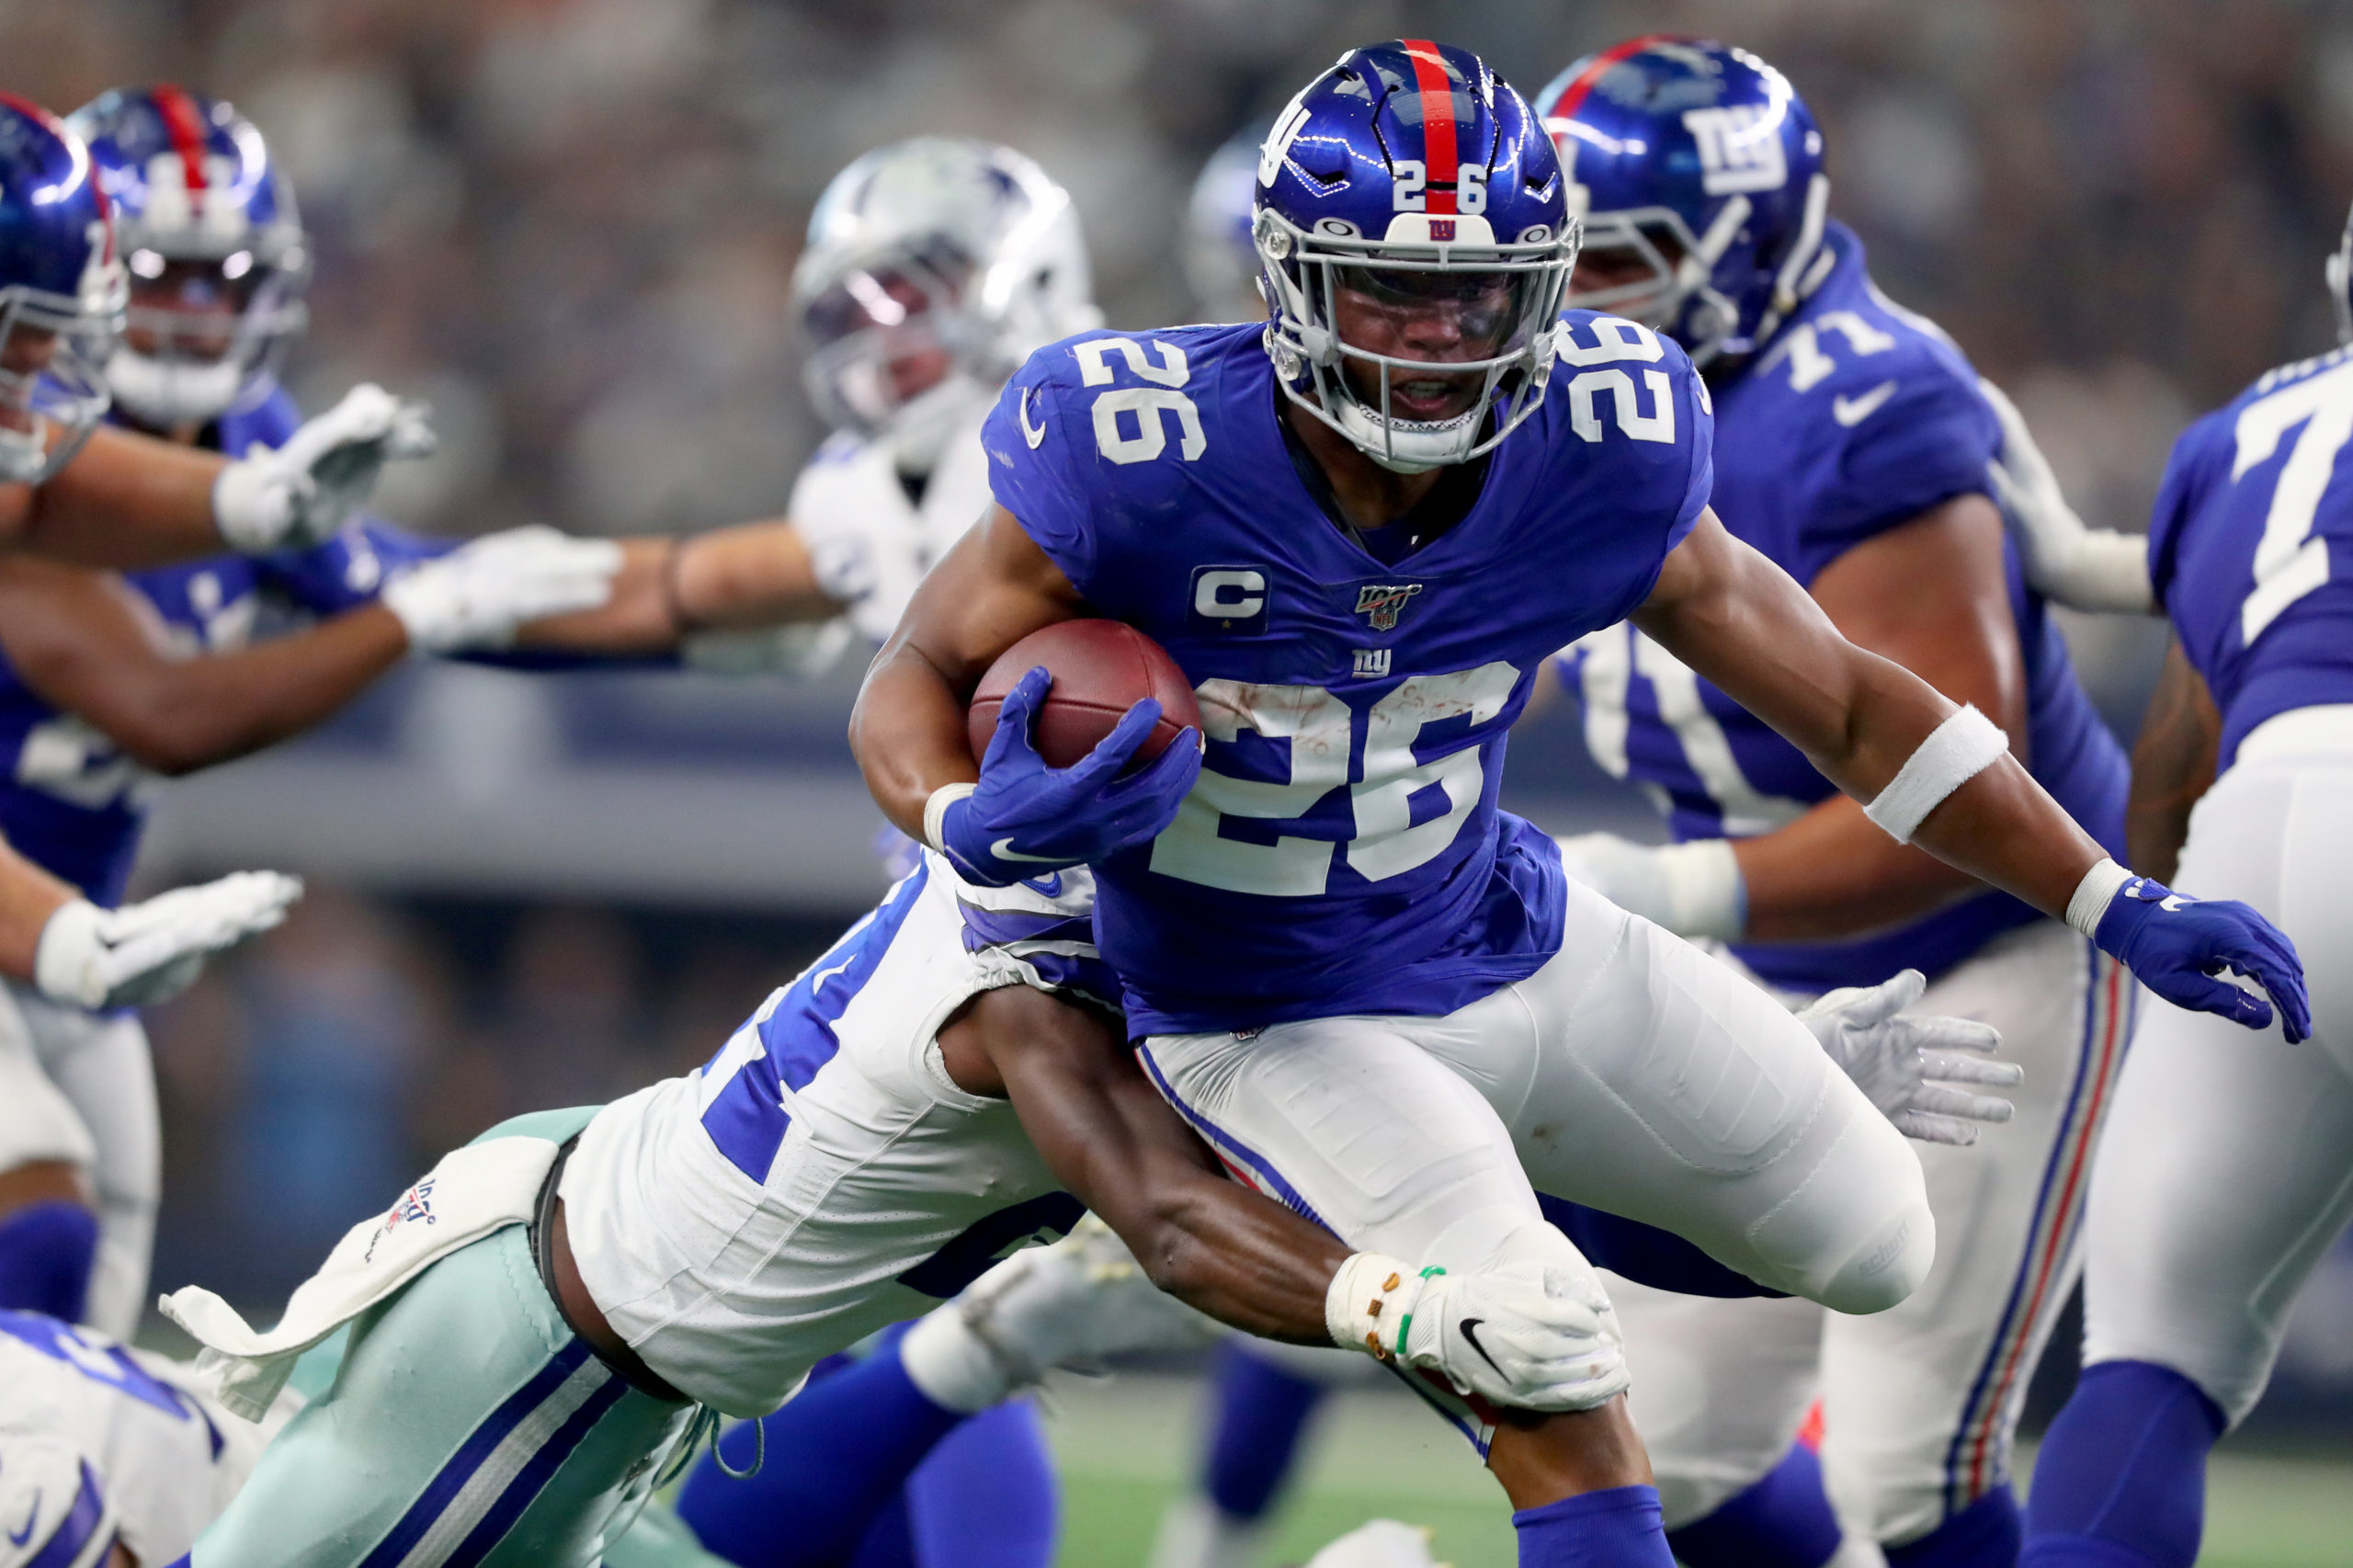 ARLINGTON, TEXAS - SEPTEMBER 08: Saquon Barkley #26 of the New York Giants carries the ball against Chidobe Awuzie #24 of the Dallas Cowboys in the third quarter at AT&T Stadium on September 08, 2019 in Arlington, Texas. Tom Pennington/Getty Images